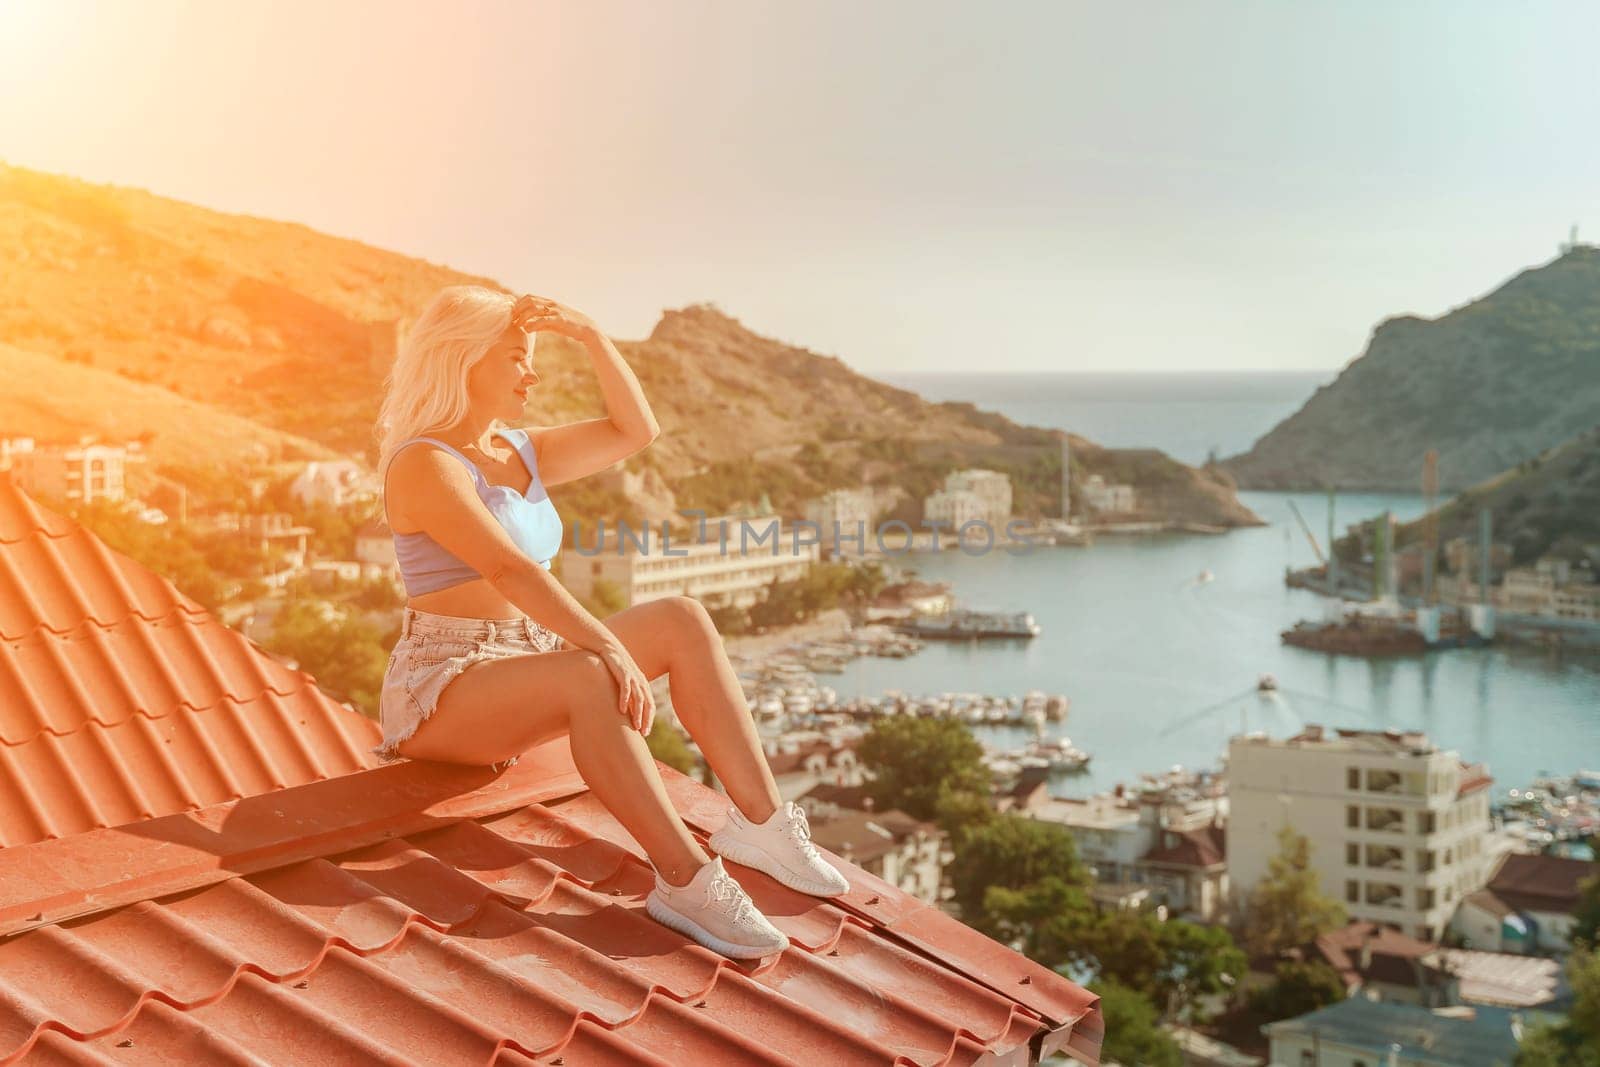 Woman sits on rooftop, enjoys town view and sea mountains. Peaceful rooftop relaxation. Below her, there is a town with several boats visible in the water. Rooftop vantage point